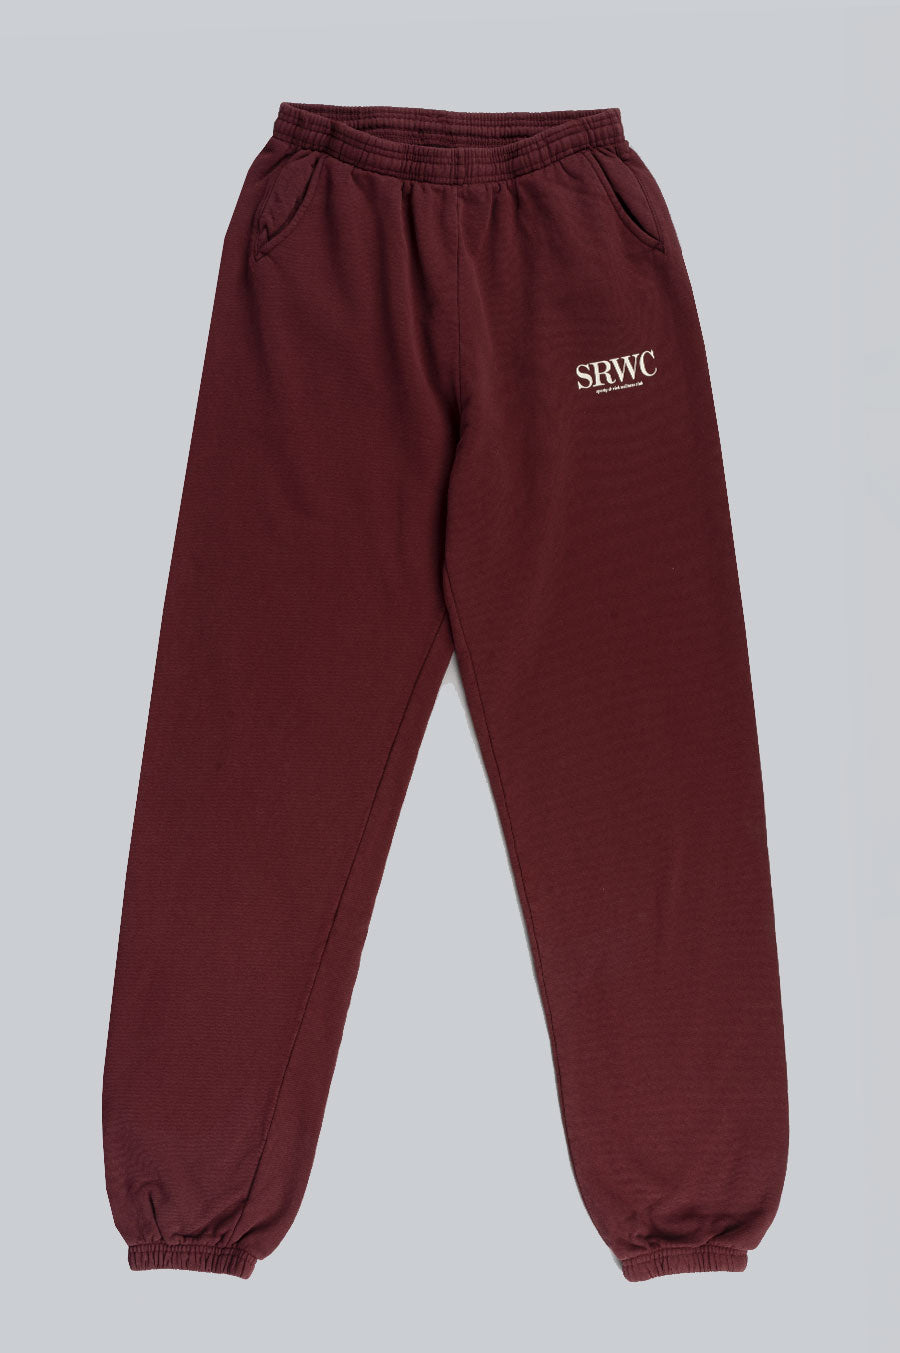 SPORTY AND RICH CLASSIC LOGO SWEATPANTS BLACK – BLENDS